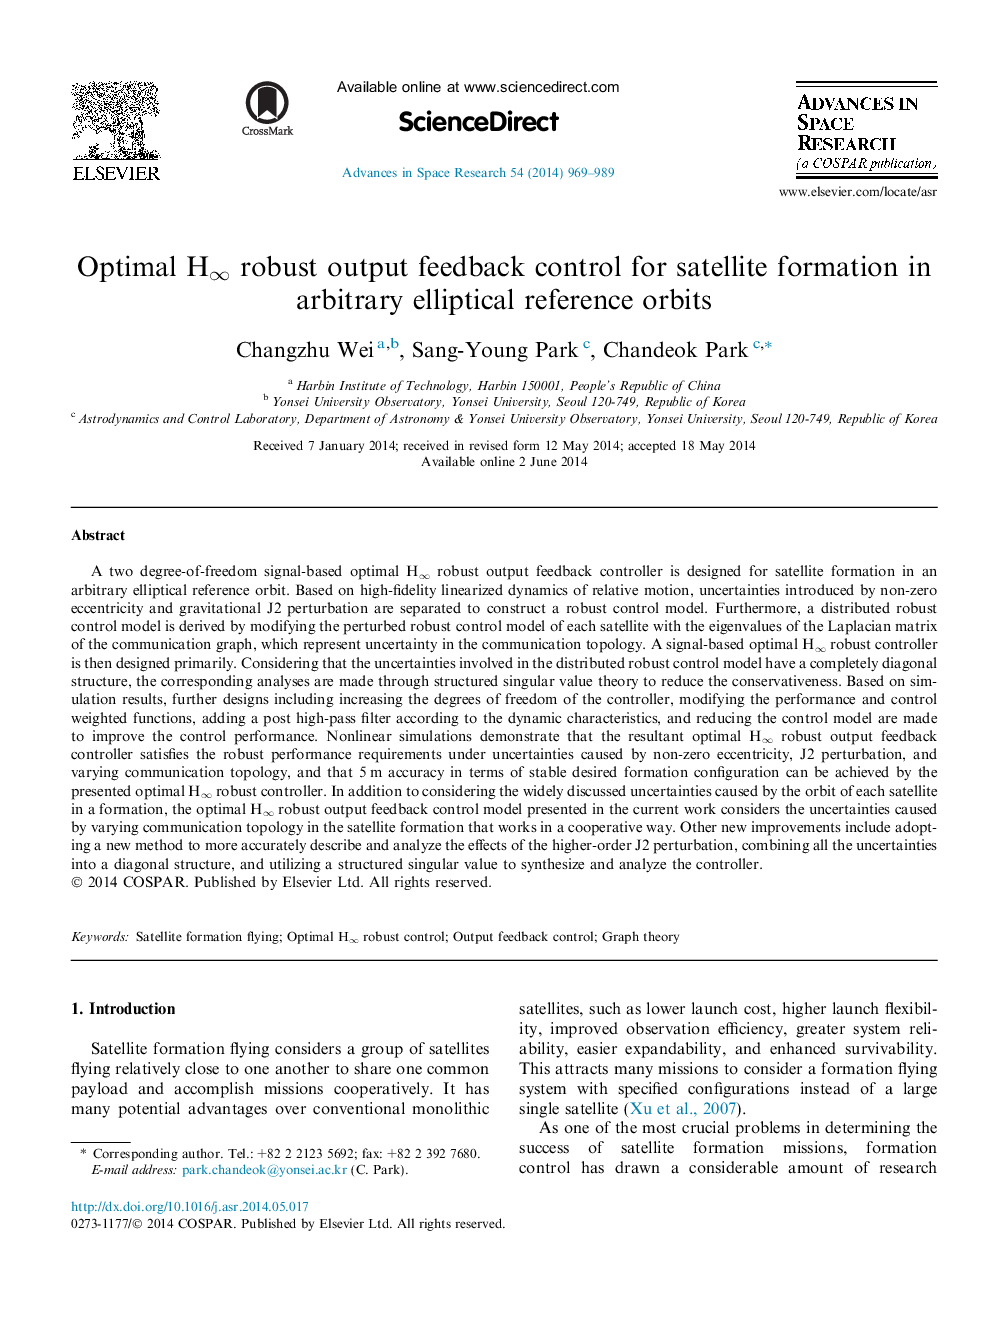 Optimal H∞ robust output feedback control for satellite formation in arbitrary elliptical reference orbits